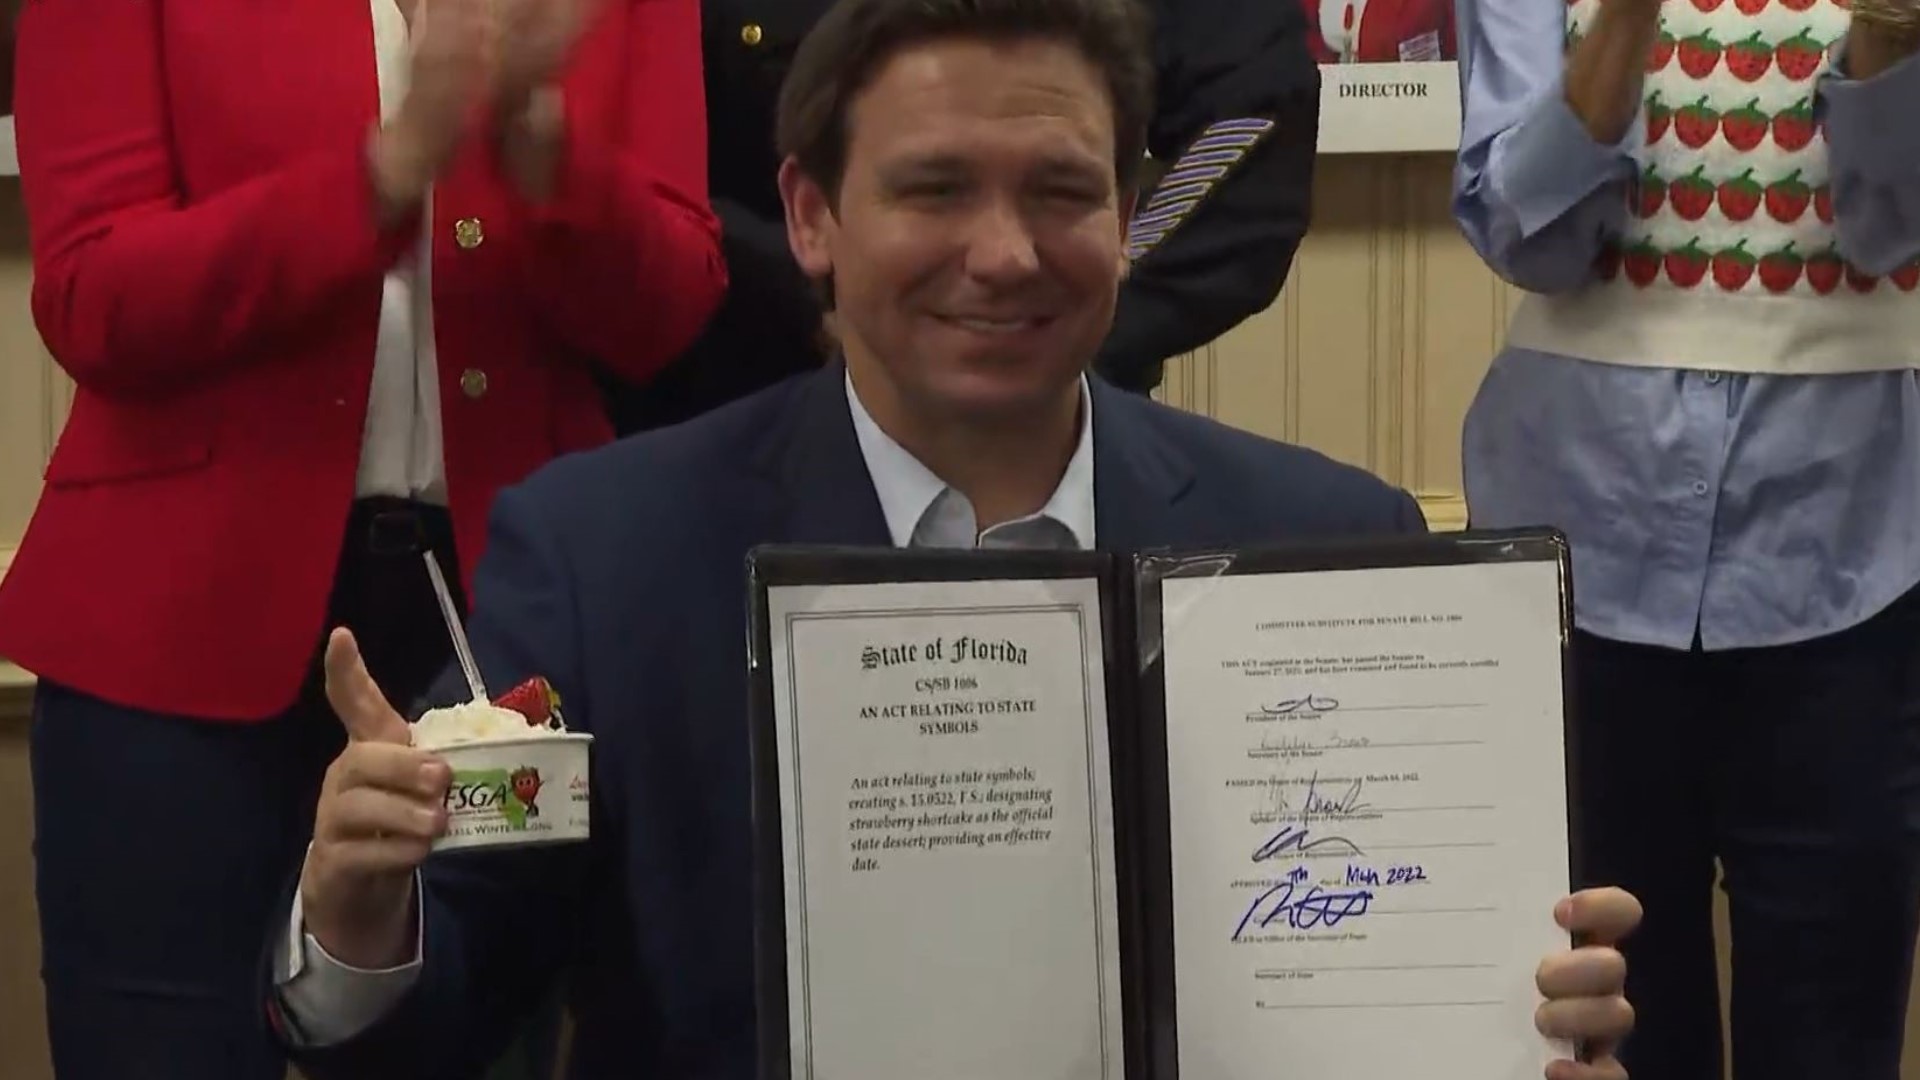 The governor took a bite of the sweet treat and gave it a thumbs up before signing the bill.